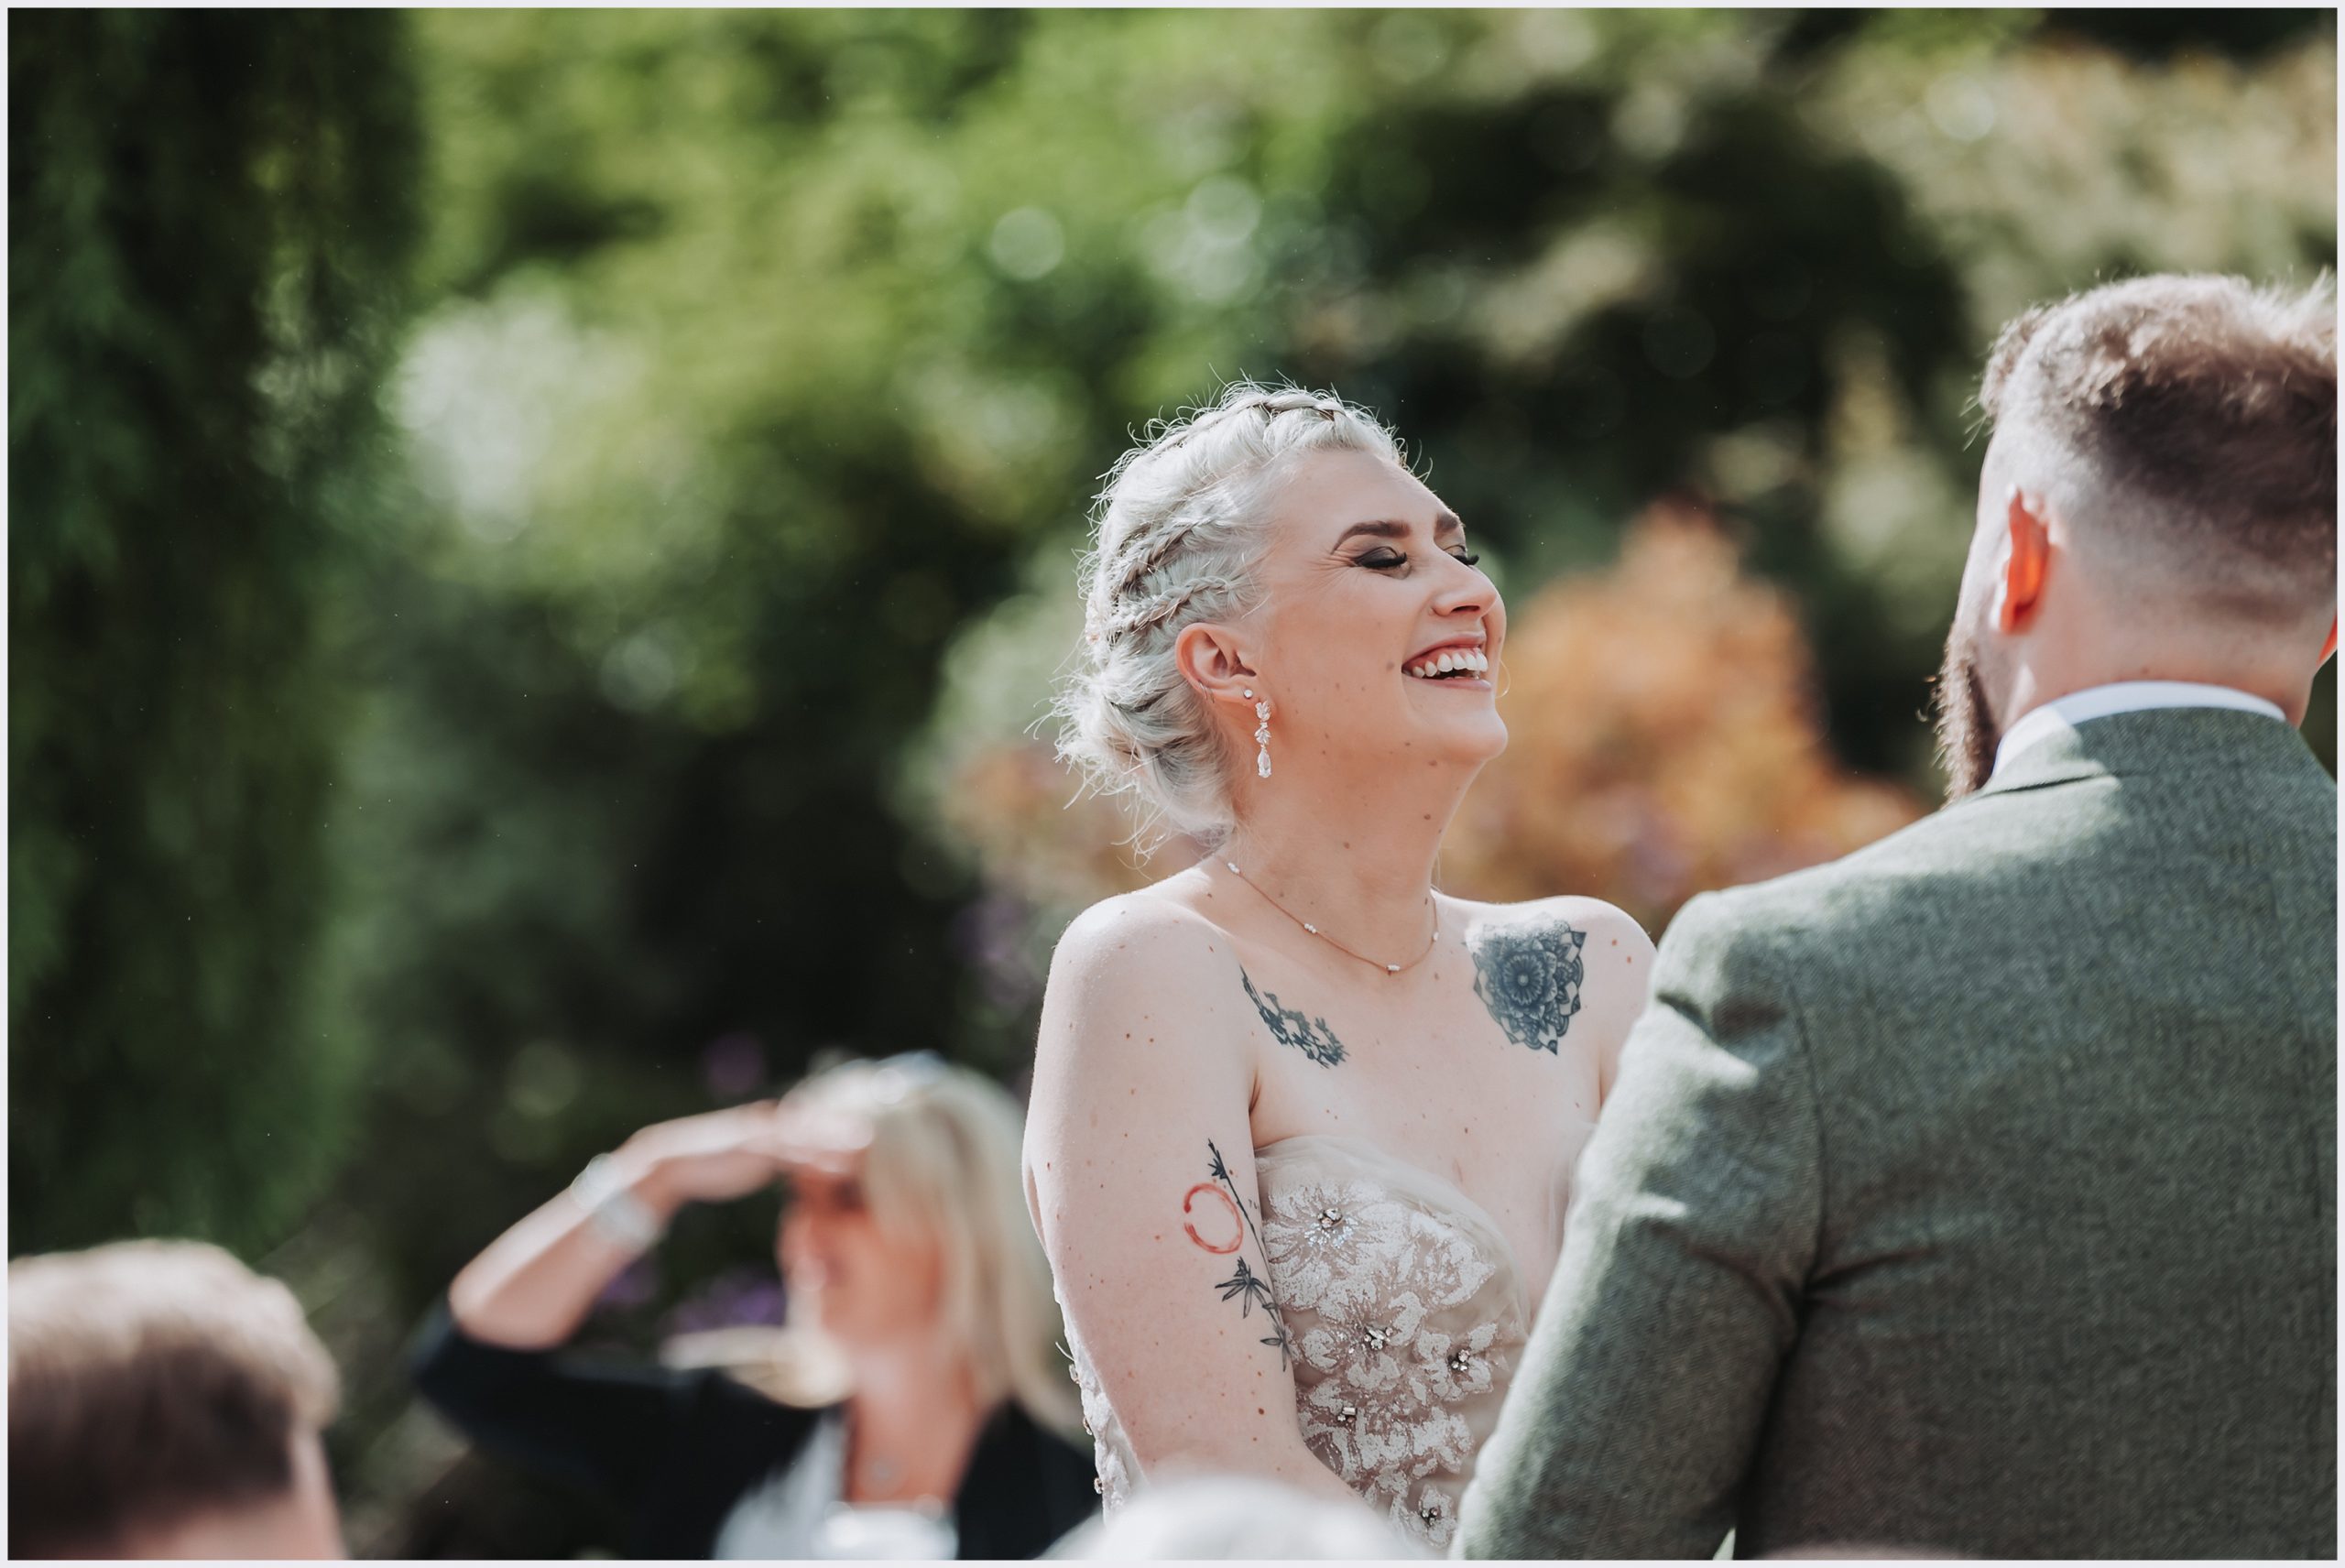 A beautiful bride throws her head back laughing during her outdoor ceremony at The Grosvenor Pulford Hotel and Spa.  North Wales based wedding photographer